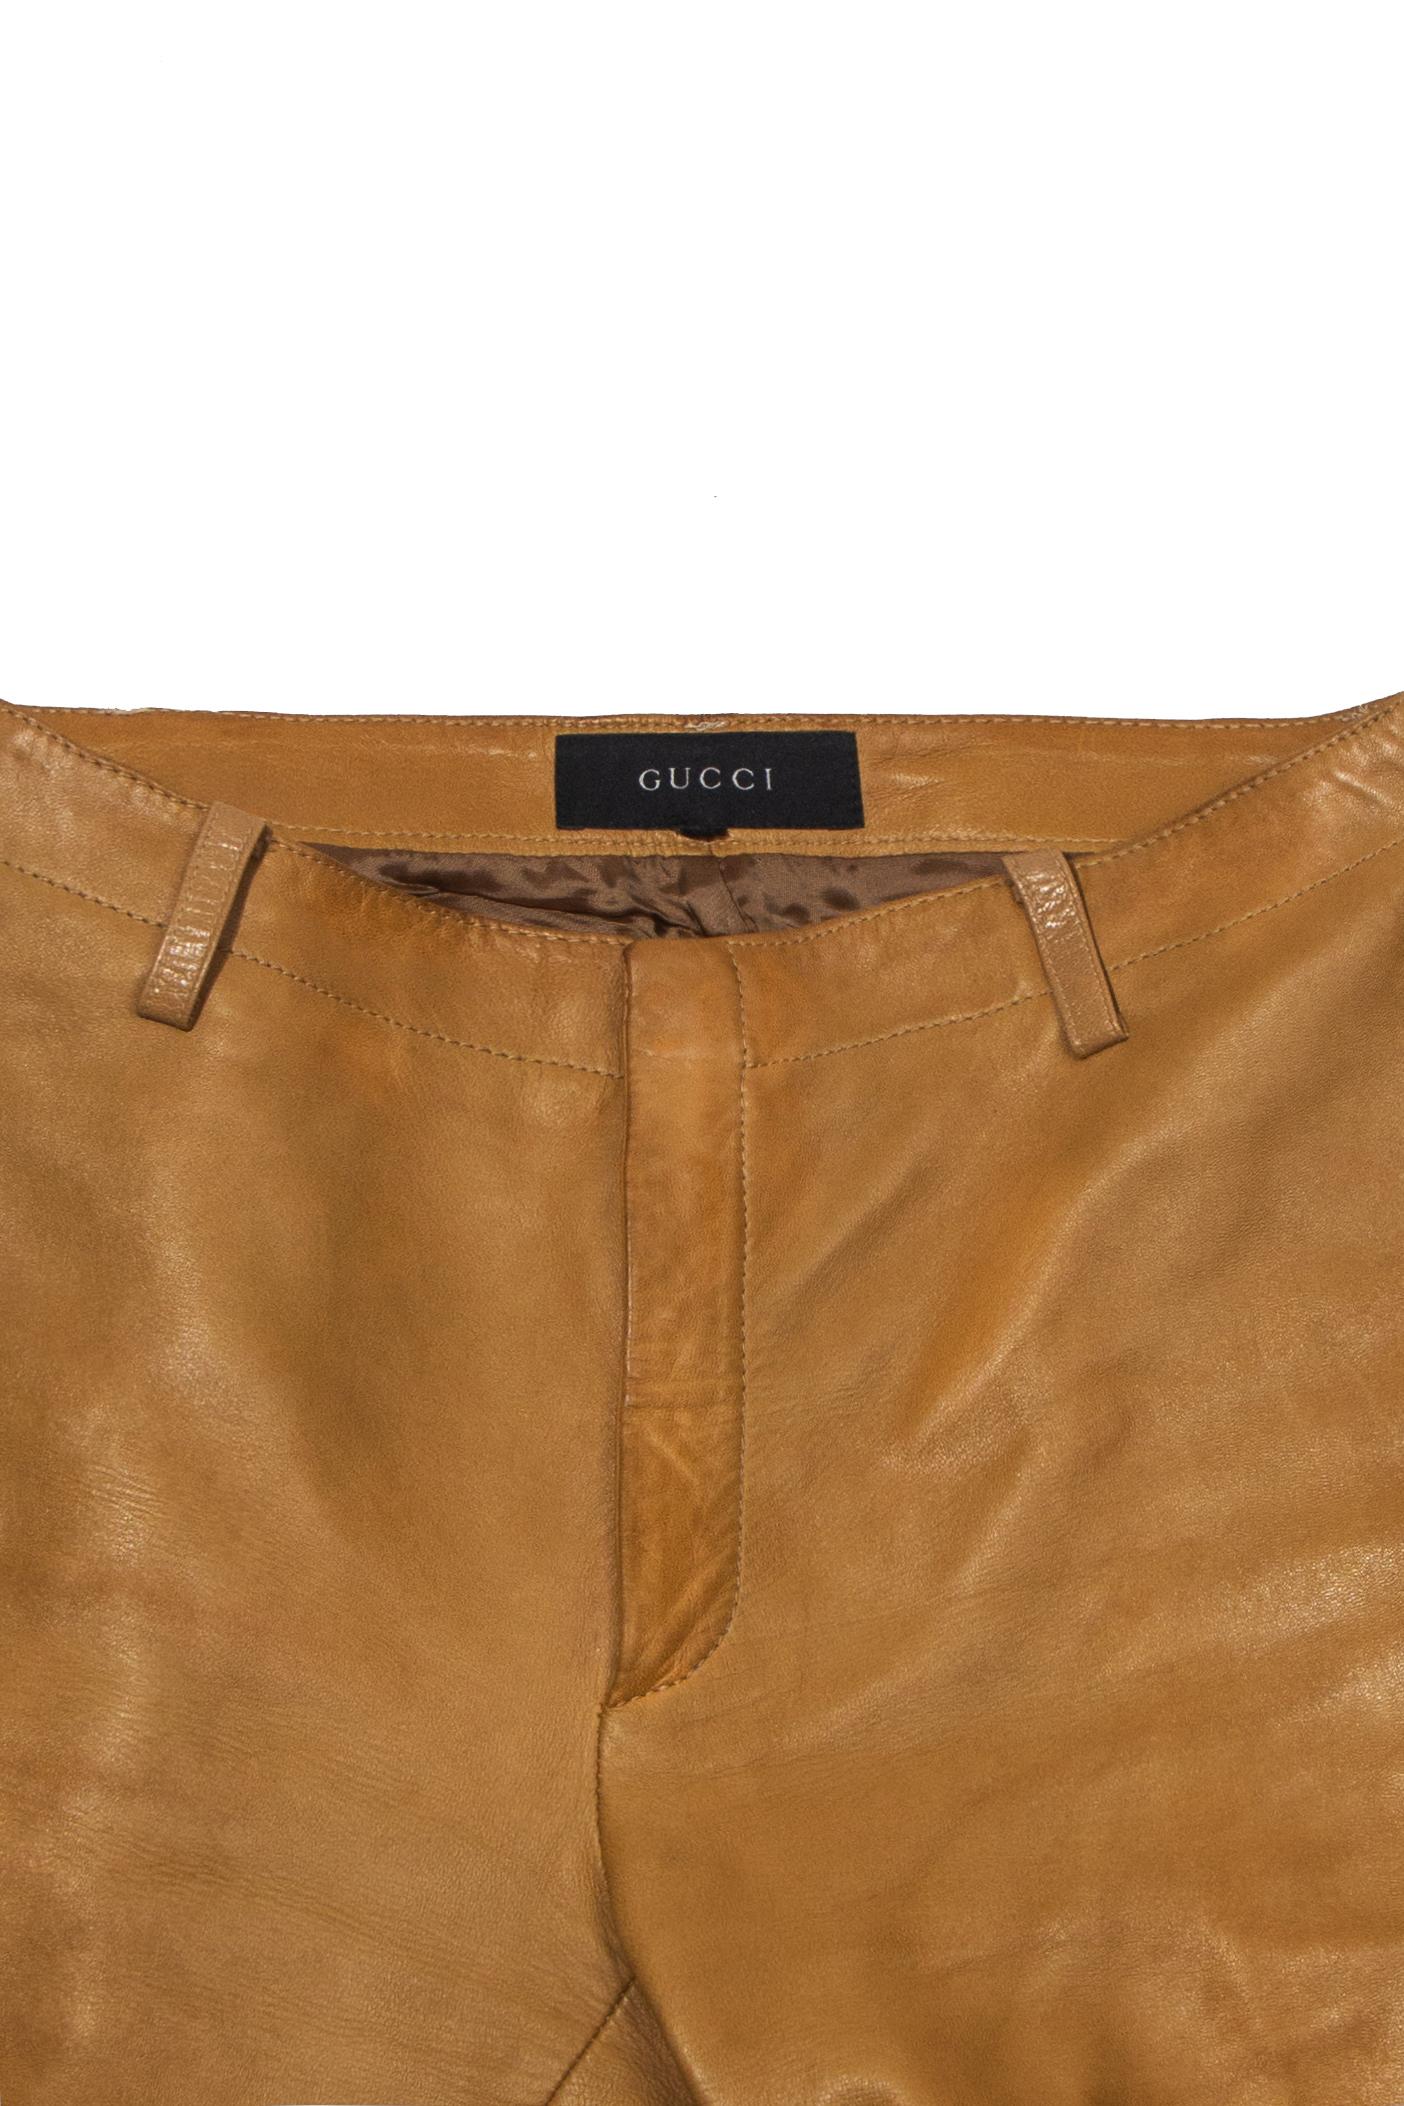 Gucci by Tom Ford men's tan leather motorcycle pants, fw 2000 For Sale 6